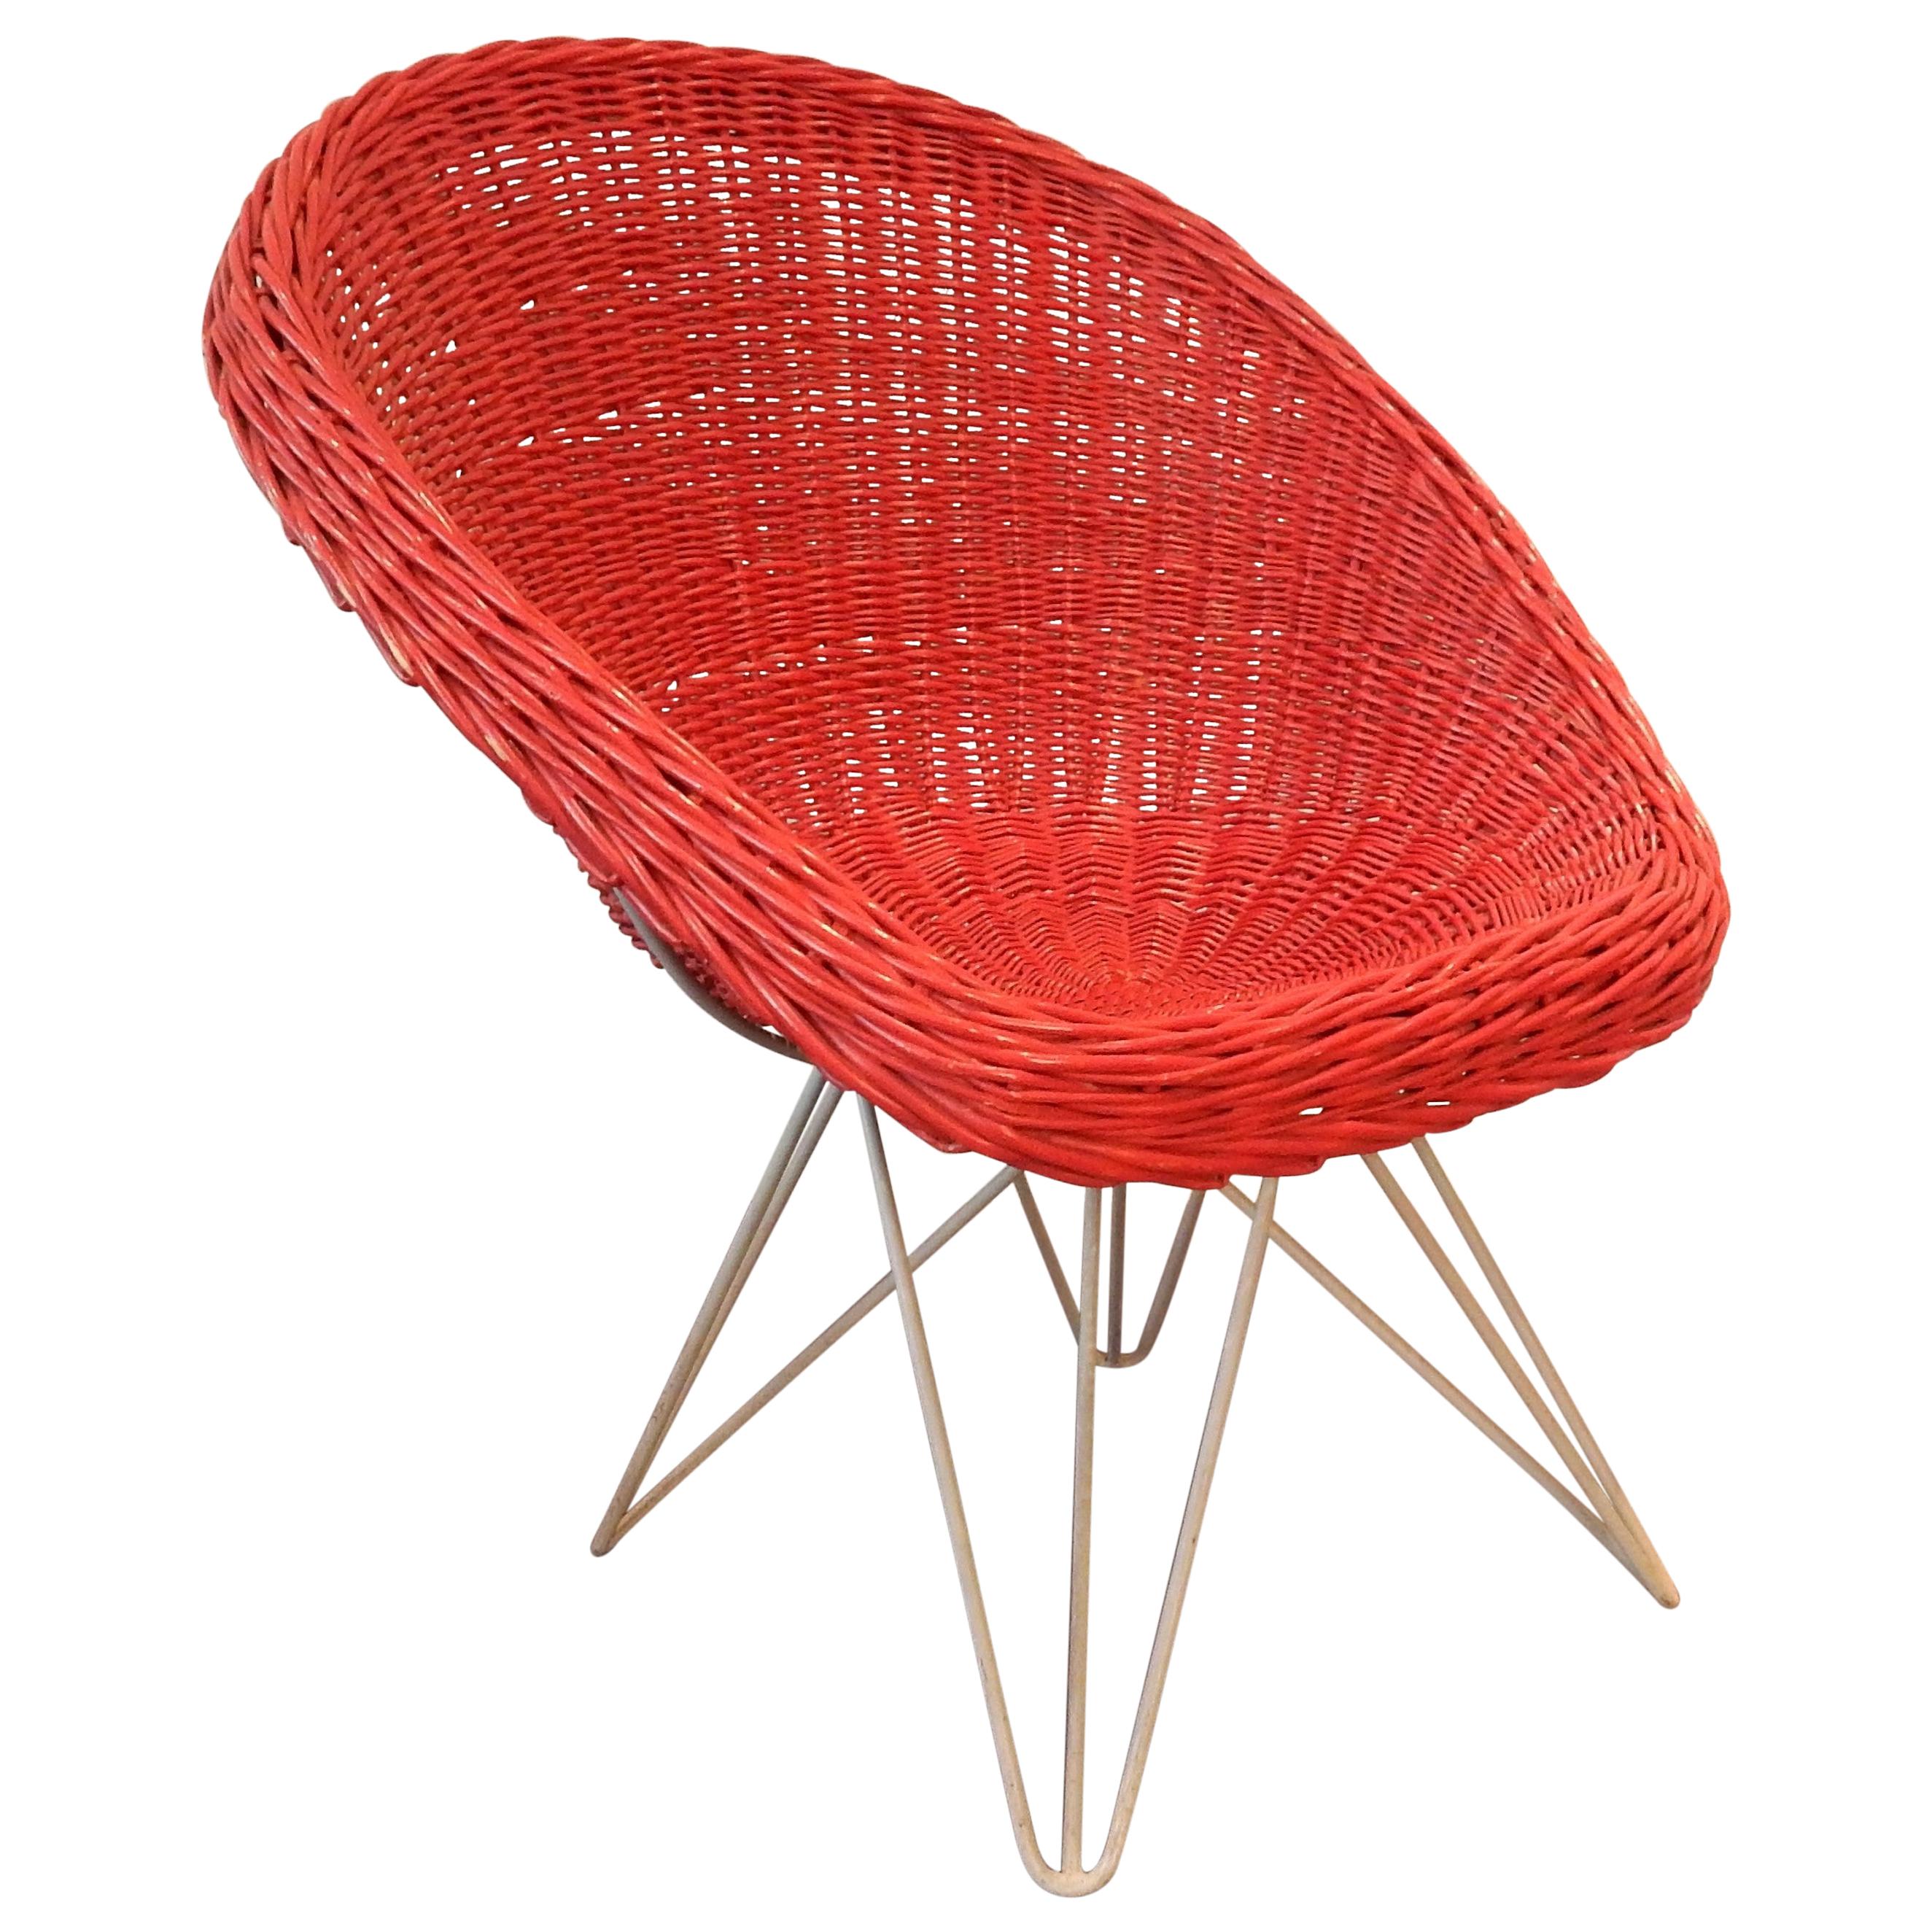 Red Rattan Lounge Chair by Teun Velthuizen for Urotan, The Netherlands, 1950s